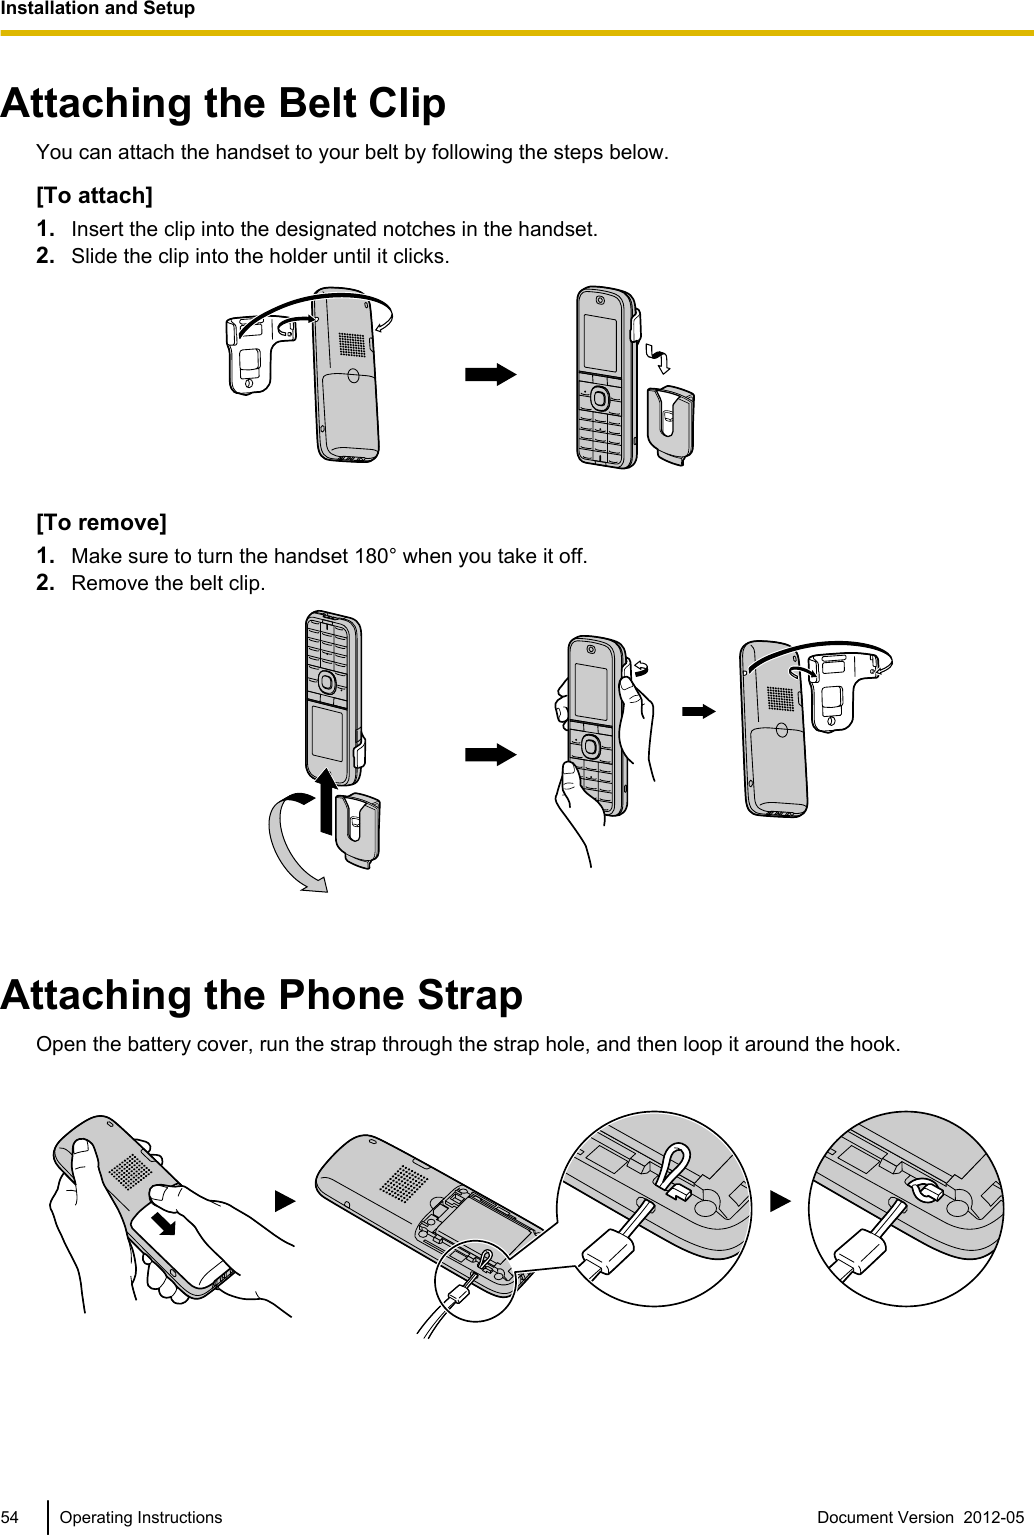 Attaching the Belt ClipYou can attach the handset to your belt by following the steps below.[To attach]1. Insert the clip into the designated notches in the handset.2. Slide the clip into the holder until it clicks.[To remove]1. Make sure to turn the handset 180° when you take it off.2. Remove the belt clip.Attaching the Phone StrapOpen the battery cover, run the strap through the strap hole, and then loop it around the hook.54 Operating Instructions Document Version  2012-05  Installation and Setup